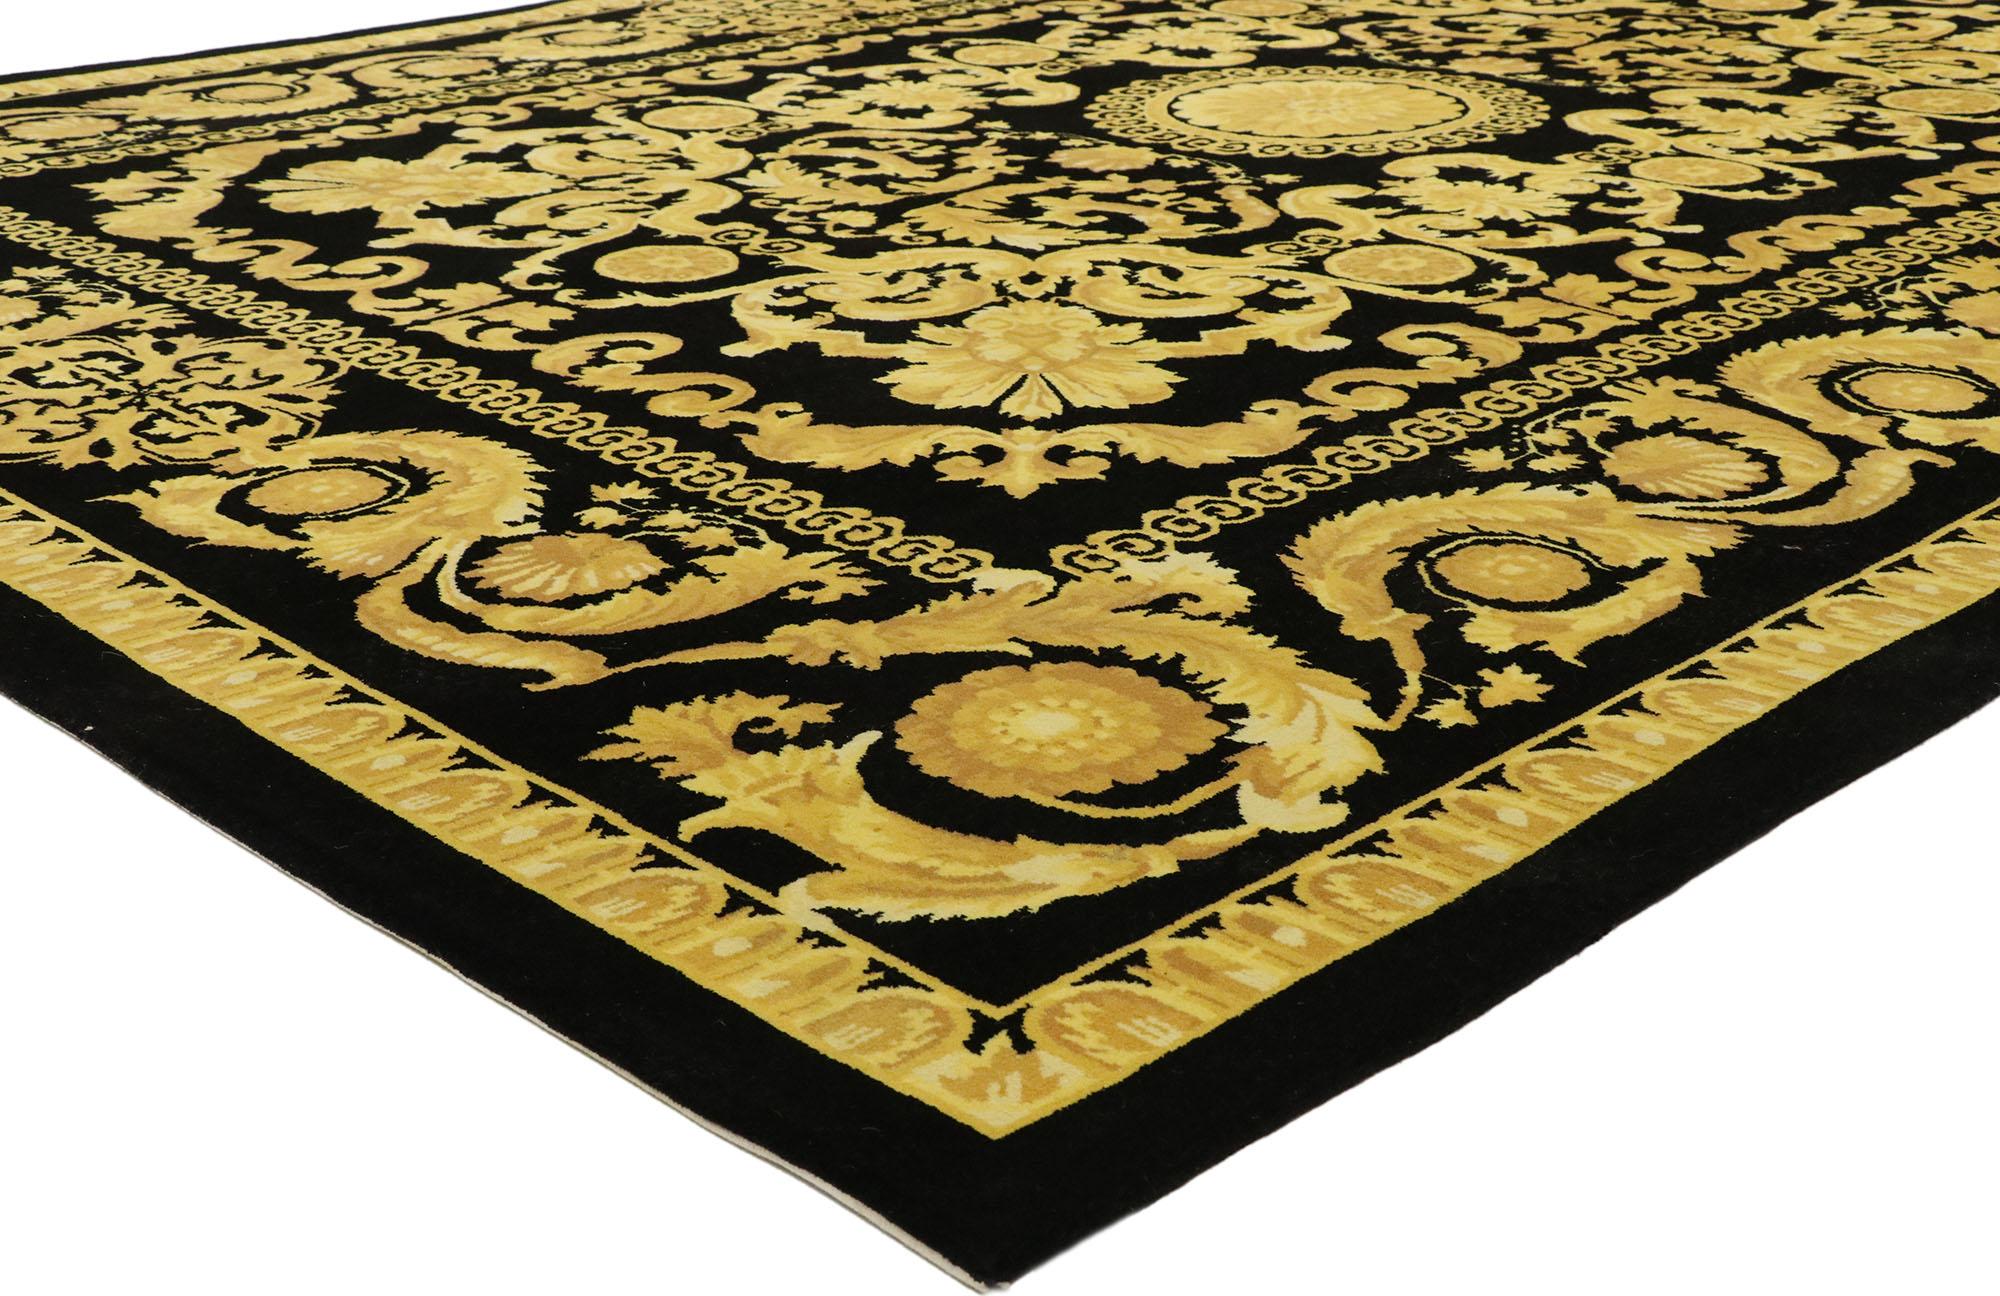 77466, vintage Indian rug with Versace Baroque style. Sure to captivate the most discerning aesthete, this hand knotted wool vintage Indian rug is the epitome of Versace vibes and luxe Baroque style in one. Taking center stage is a round floral